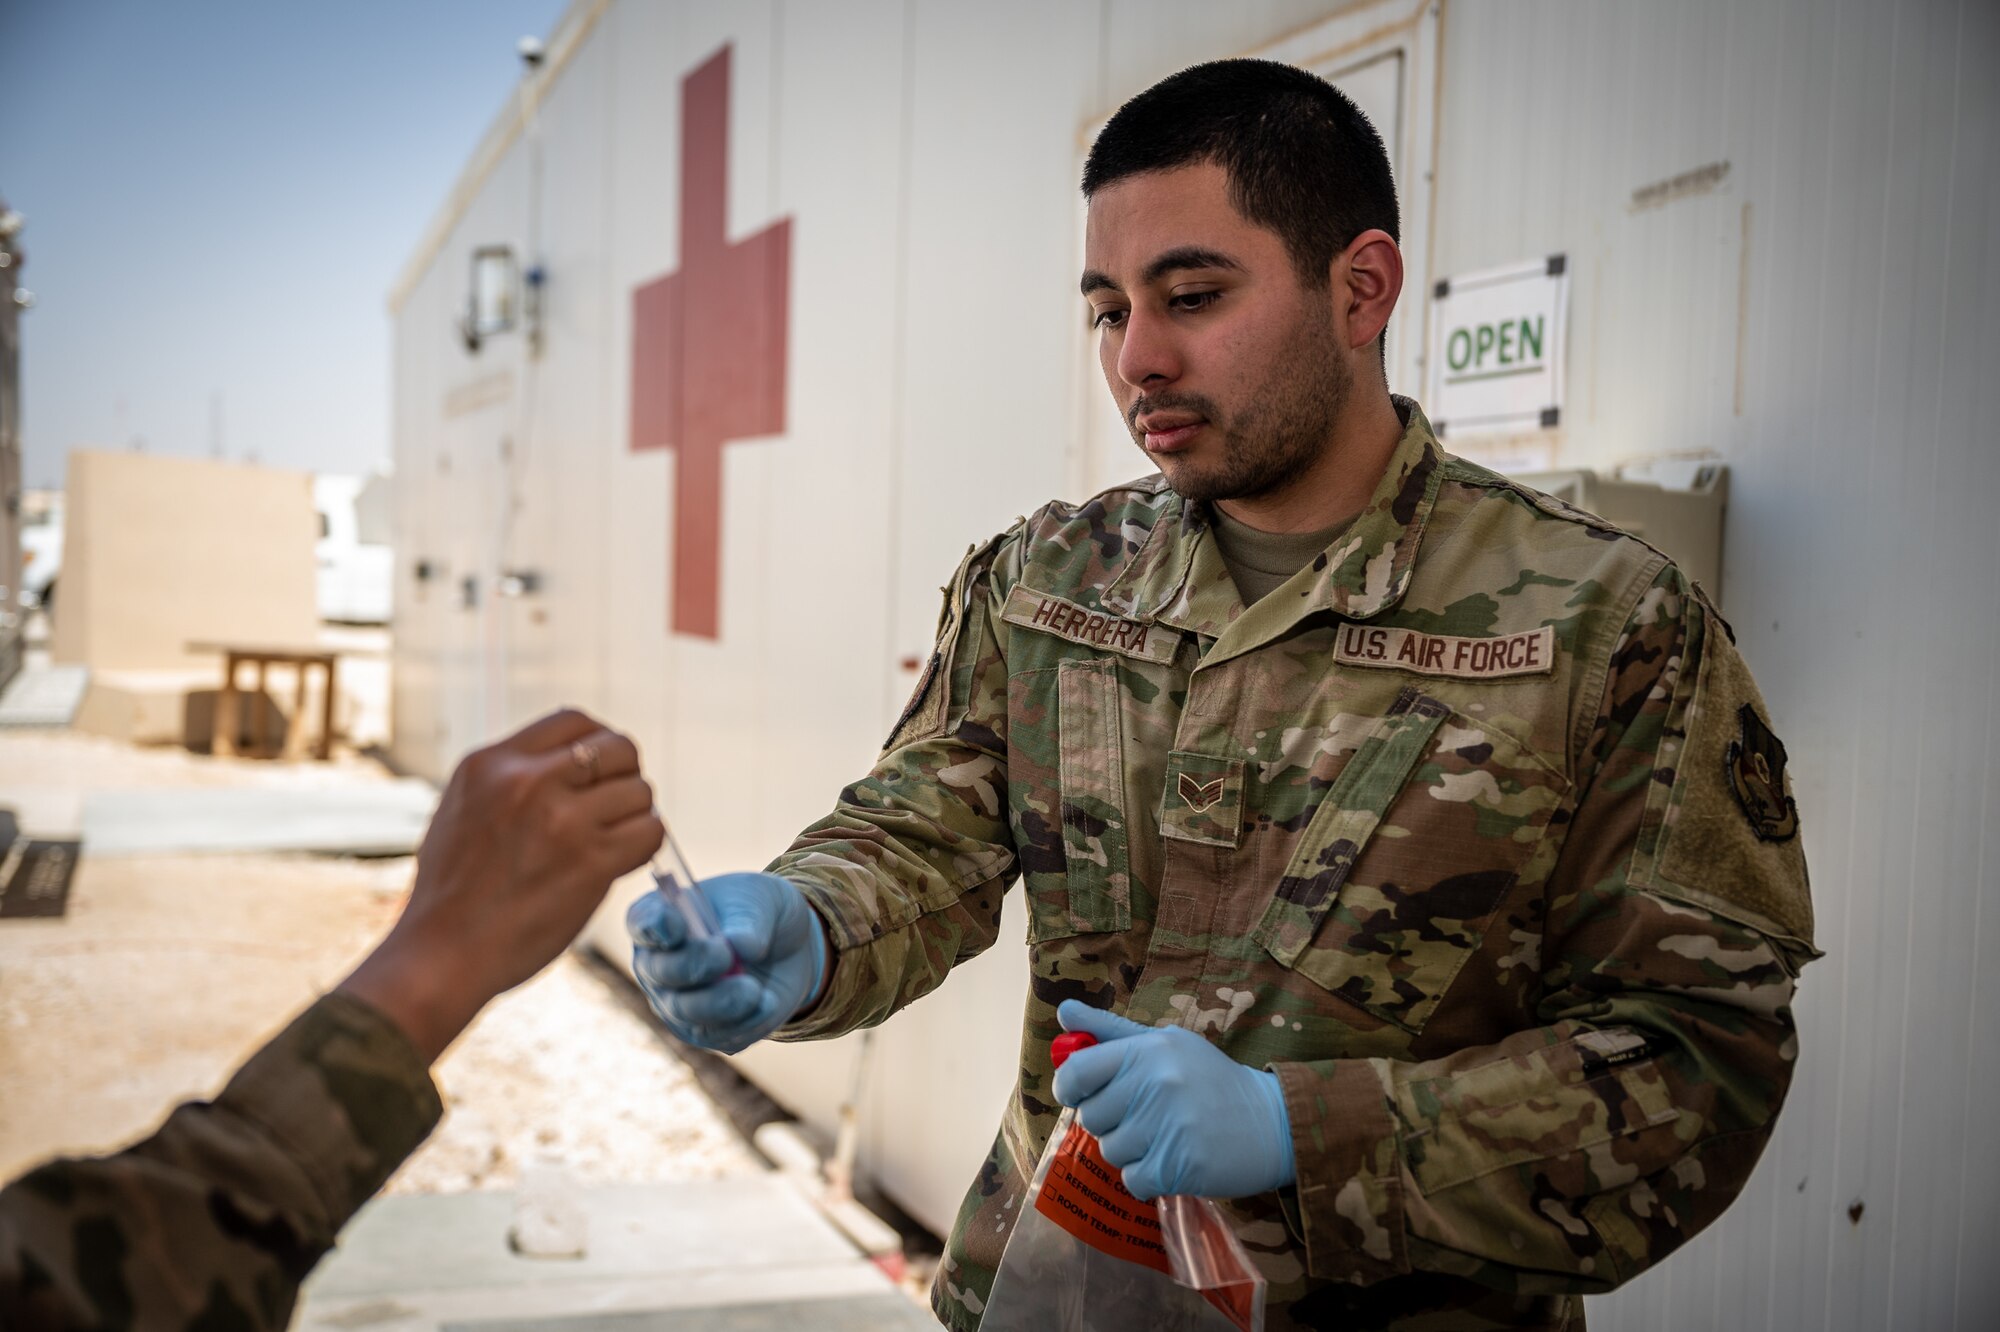 Senior Airman Michael Herrera, 332d Expeditionary Medical Group X-ray technician, administers a COVID-19 test to a 332d Air Expeditionary Wing Airman at an undisclosed location in Southwest Asia, April 15, 2022. Herrera supports COVID-19 testing as a multi-capable Airman although his primary job is as an X-ray technician. (U.S. Air Force photo by Master Sgt. Christopher Parr)